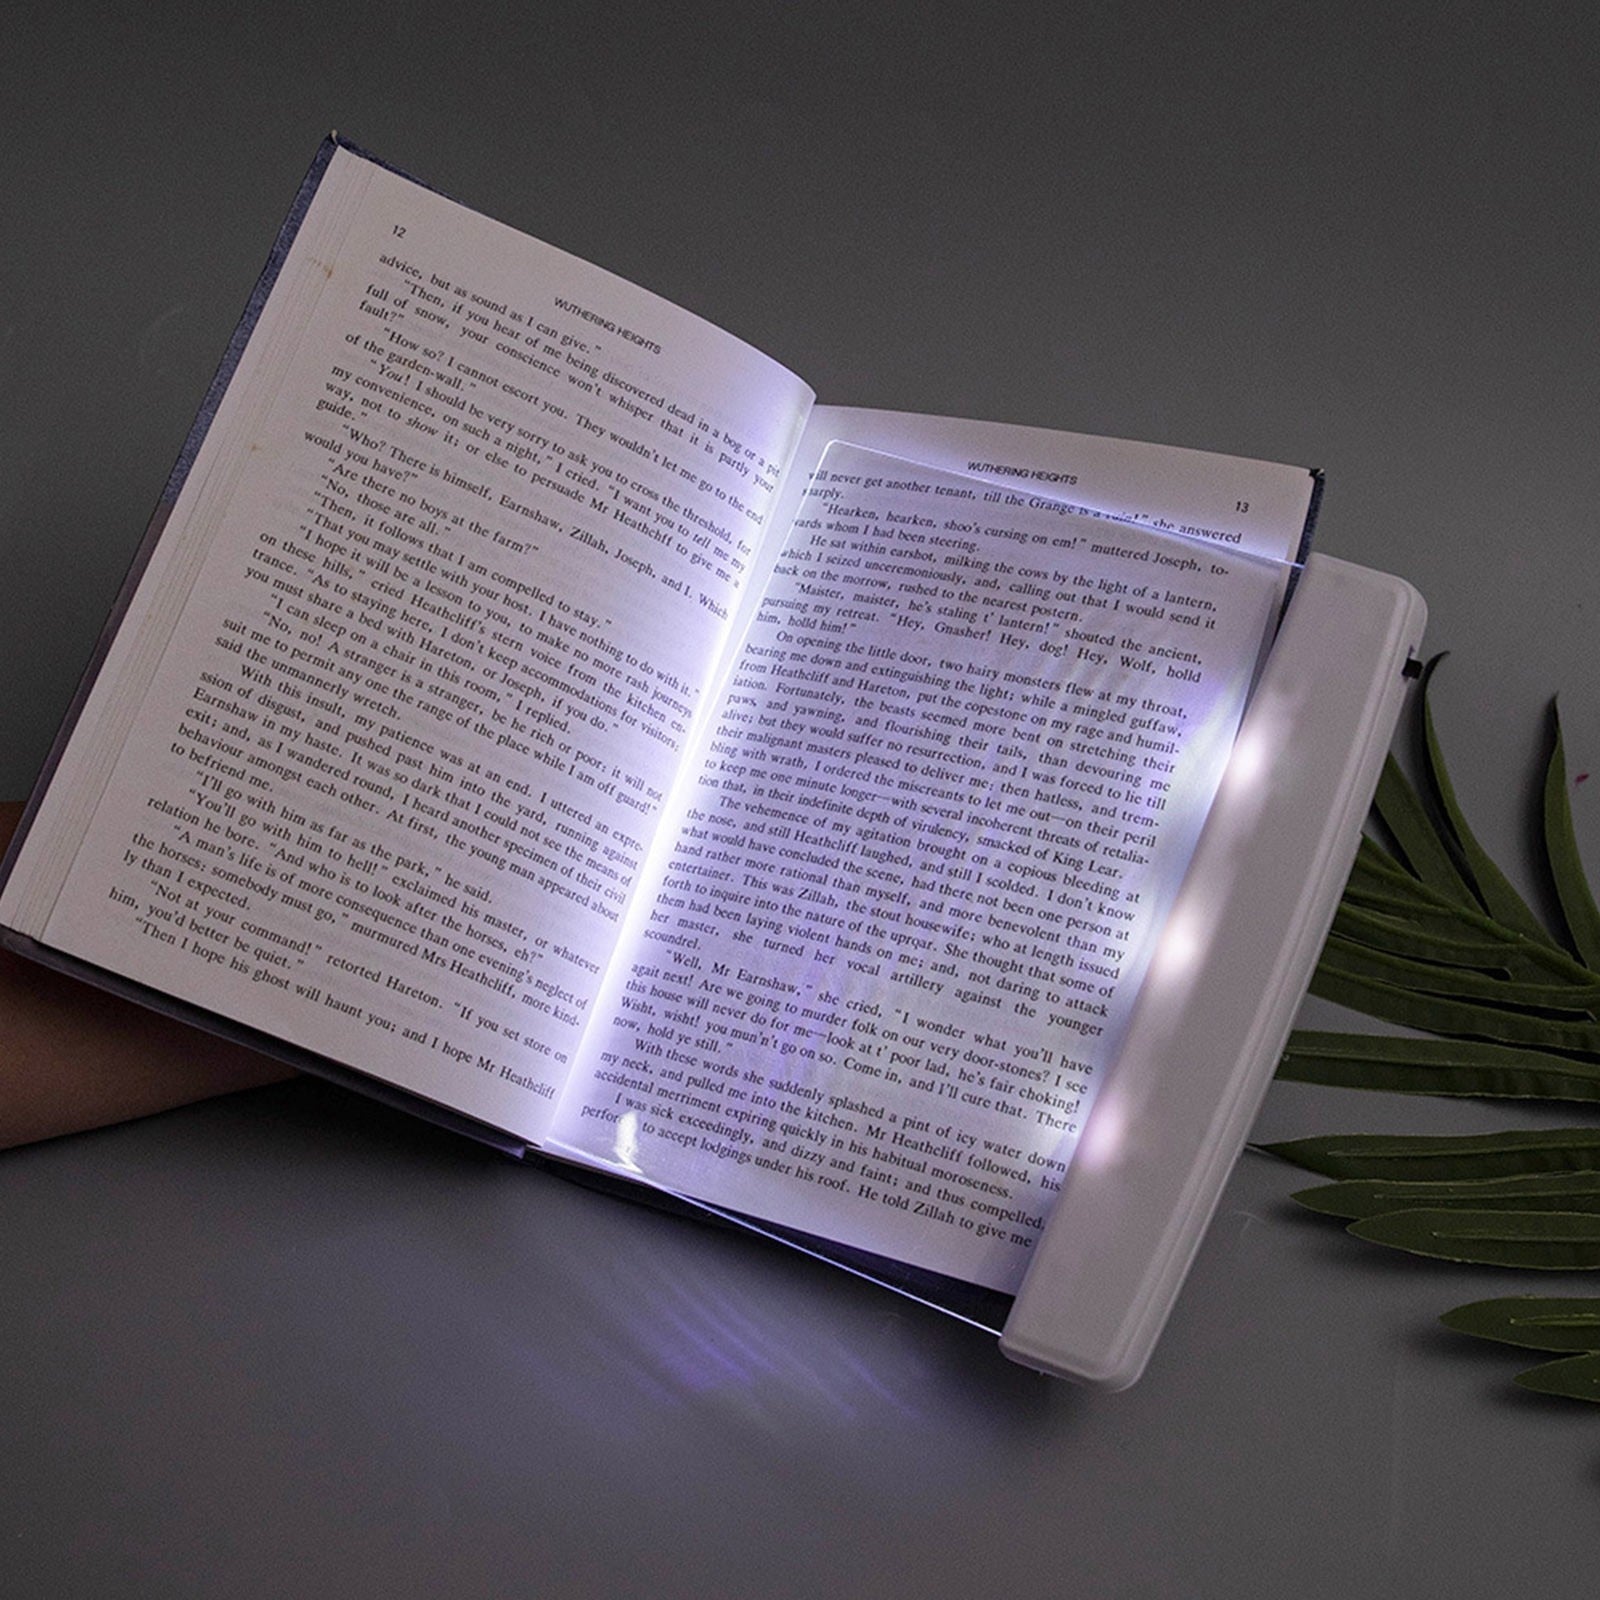 Round Neck Reading Light, LED Book Light for Reading in Bed at Night.